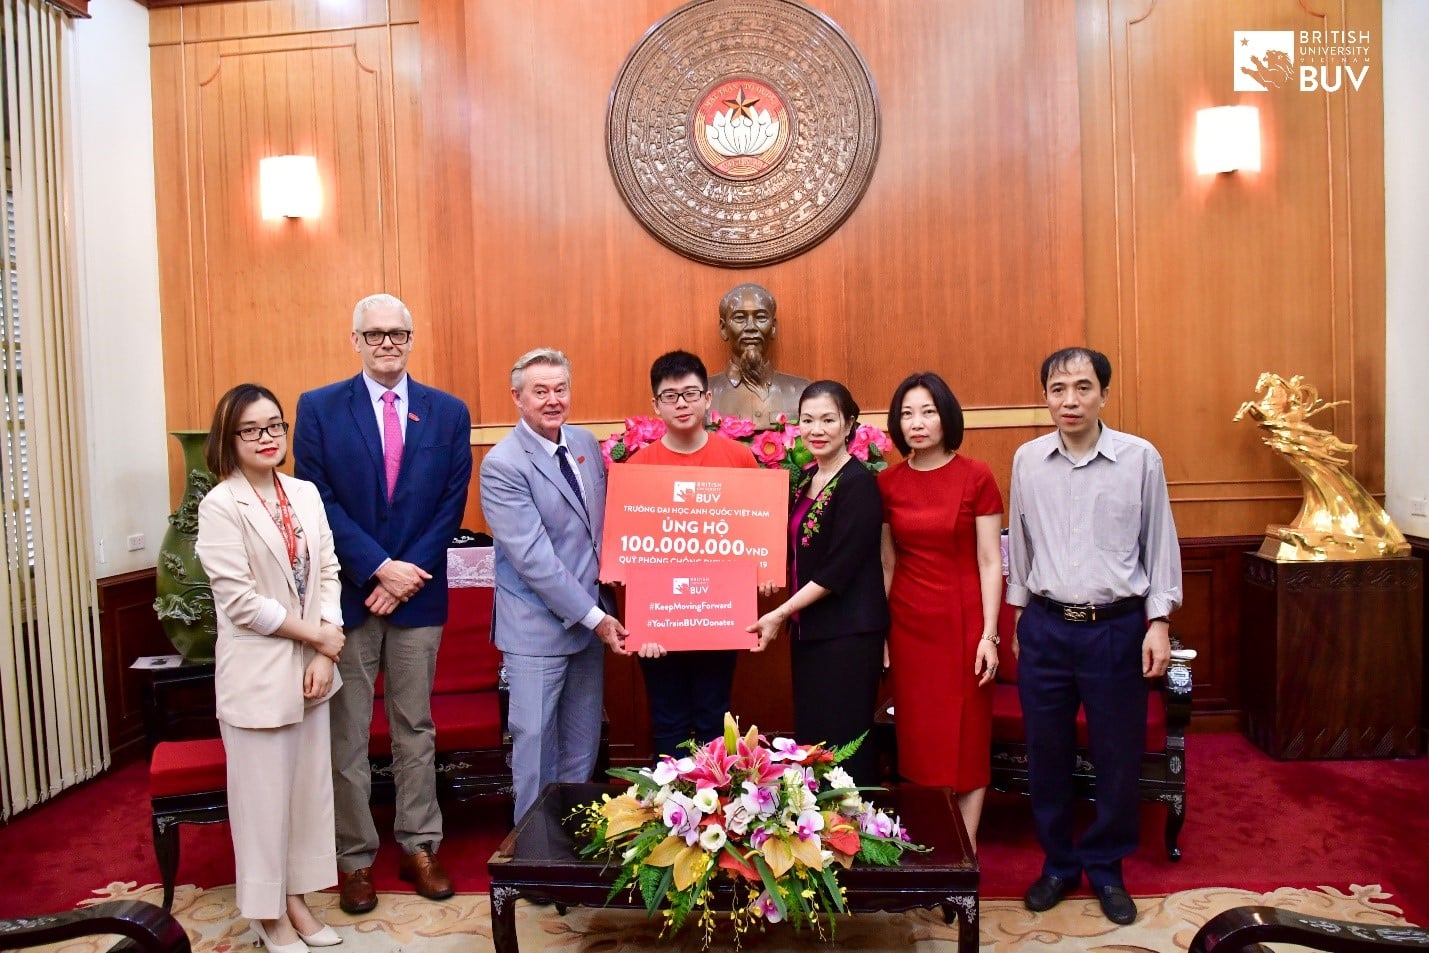 BUV donates 100 million VND to the “Covid-19 Disease Prevention Fund” of the Central Committee of the Vietnamese Fatherland Front